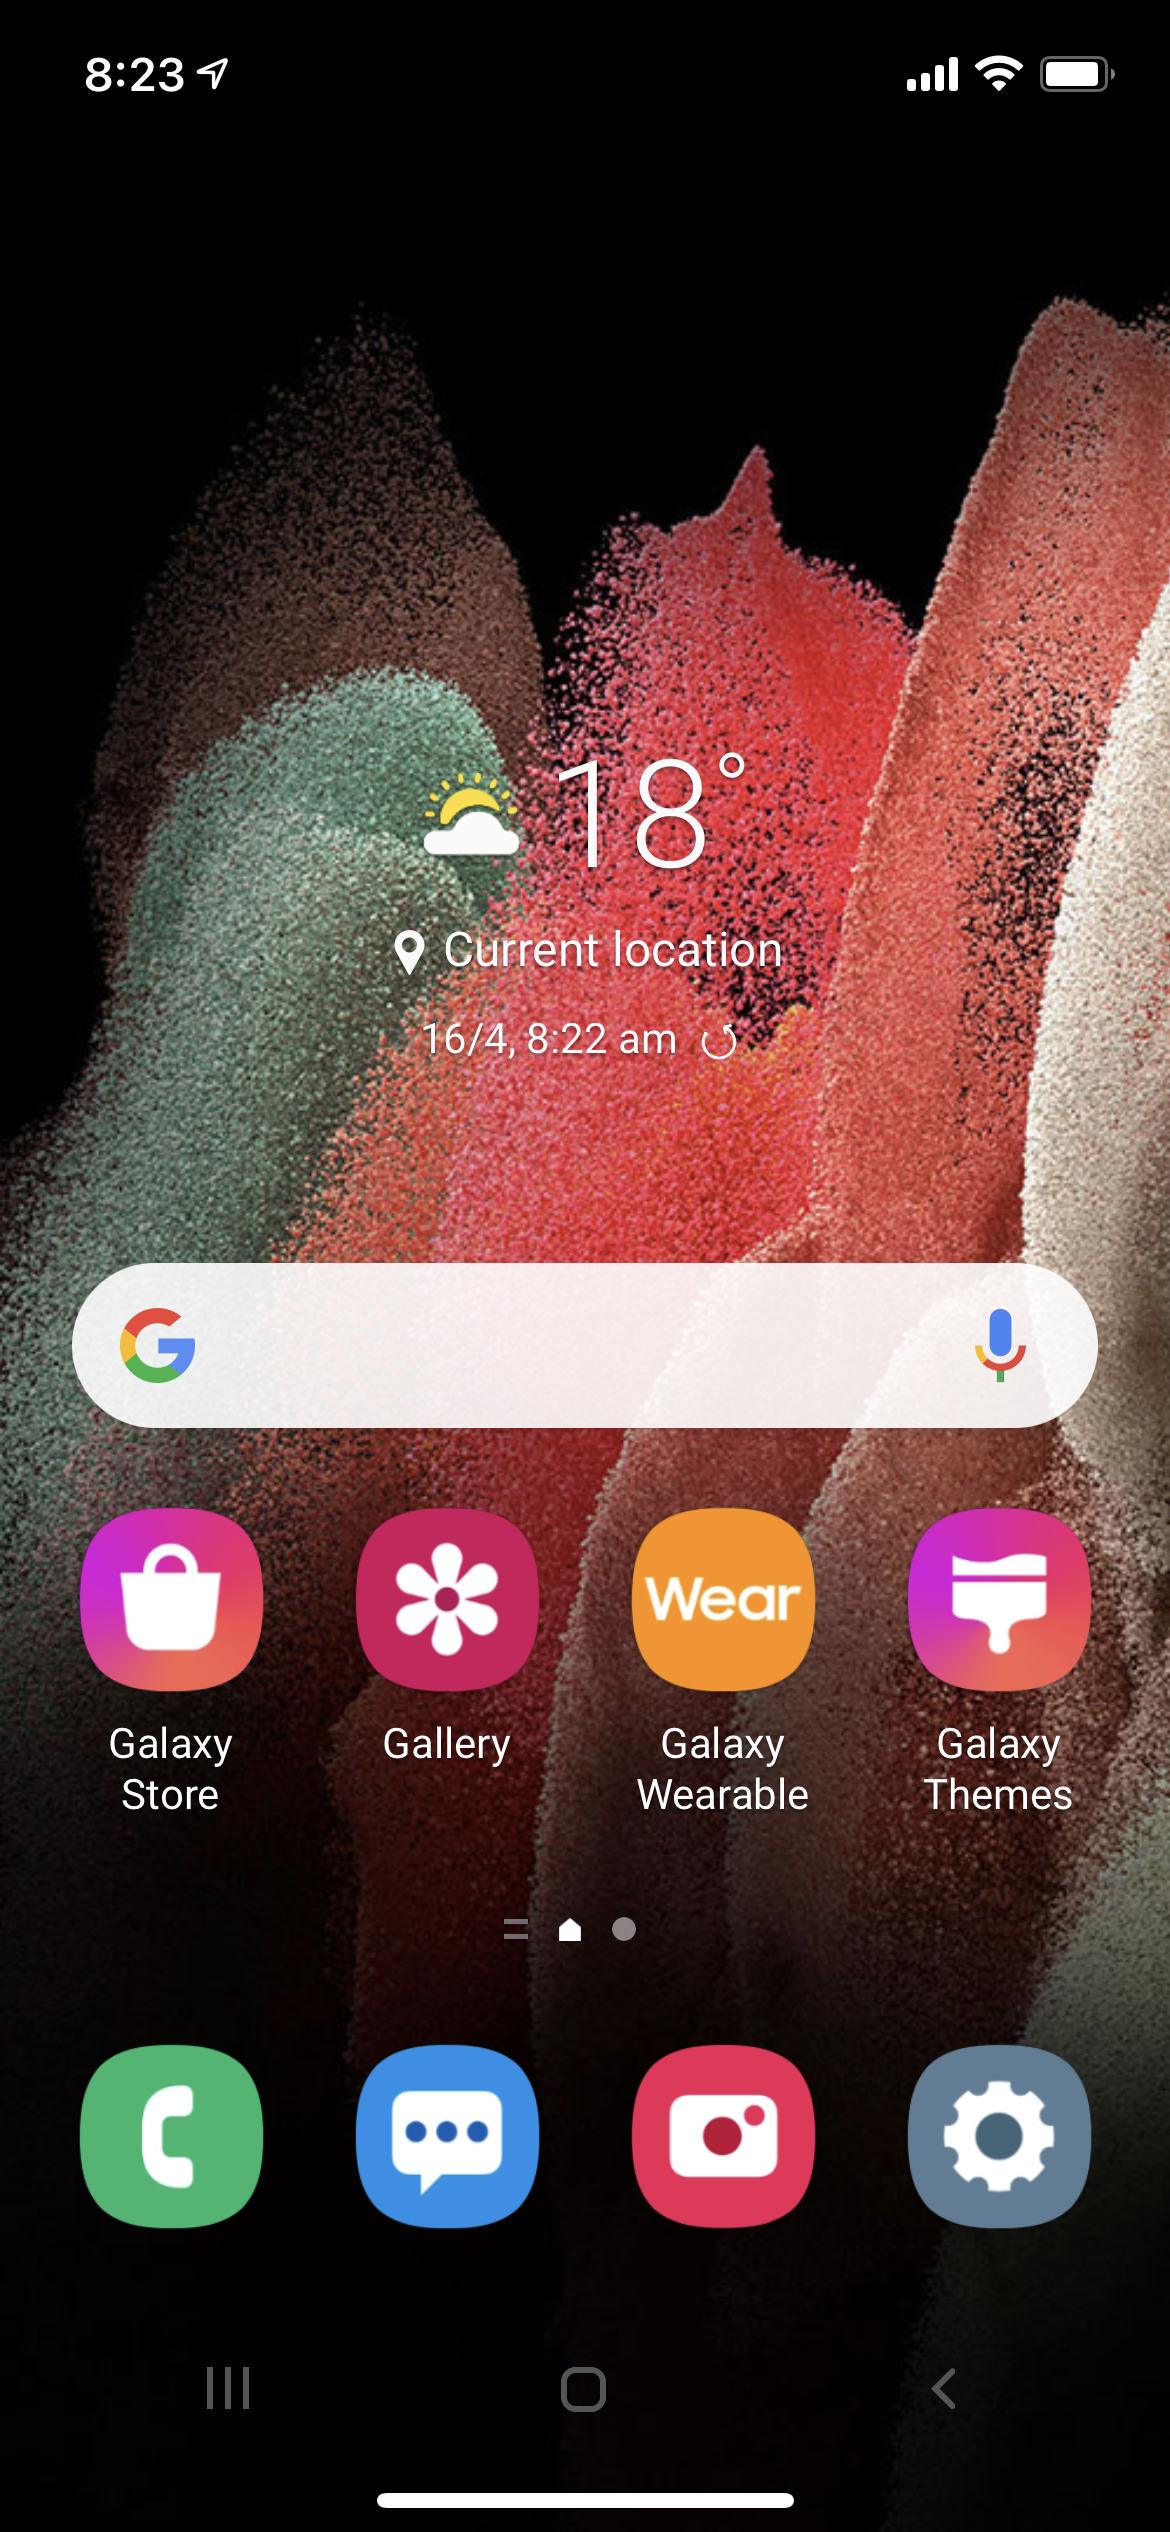 Samsung home screen on… an iPhone?